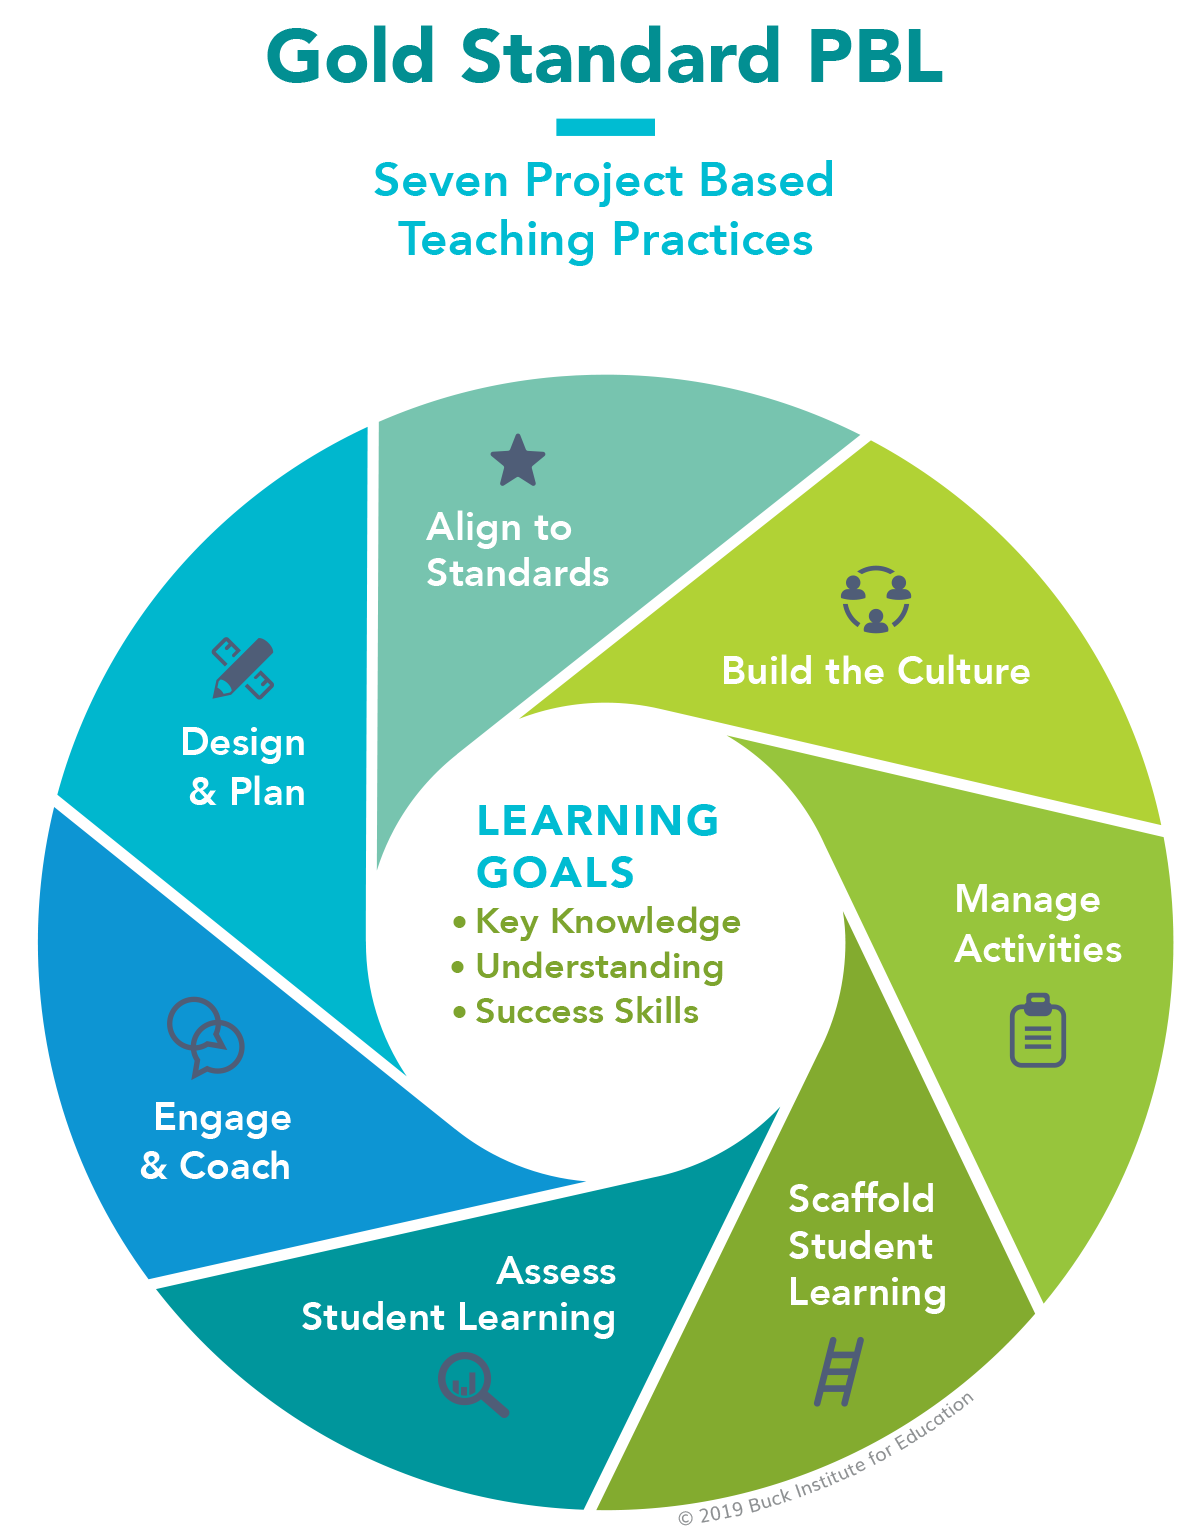 Gold Standards PBL - Seven Project Based Teaching Practices Center of image Key Knowledge, Understanding, Success Skills-around center Align with Standards - Build Culture - Manage Activities - Scaffold Student Learning -Assess Student Learning - Engage and Coach - Design and plan